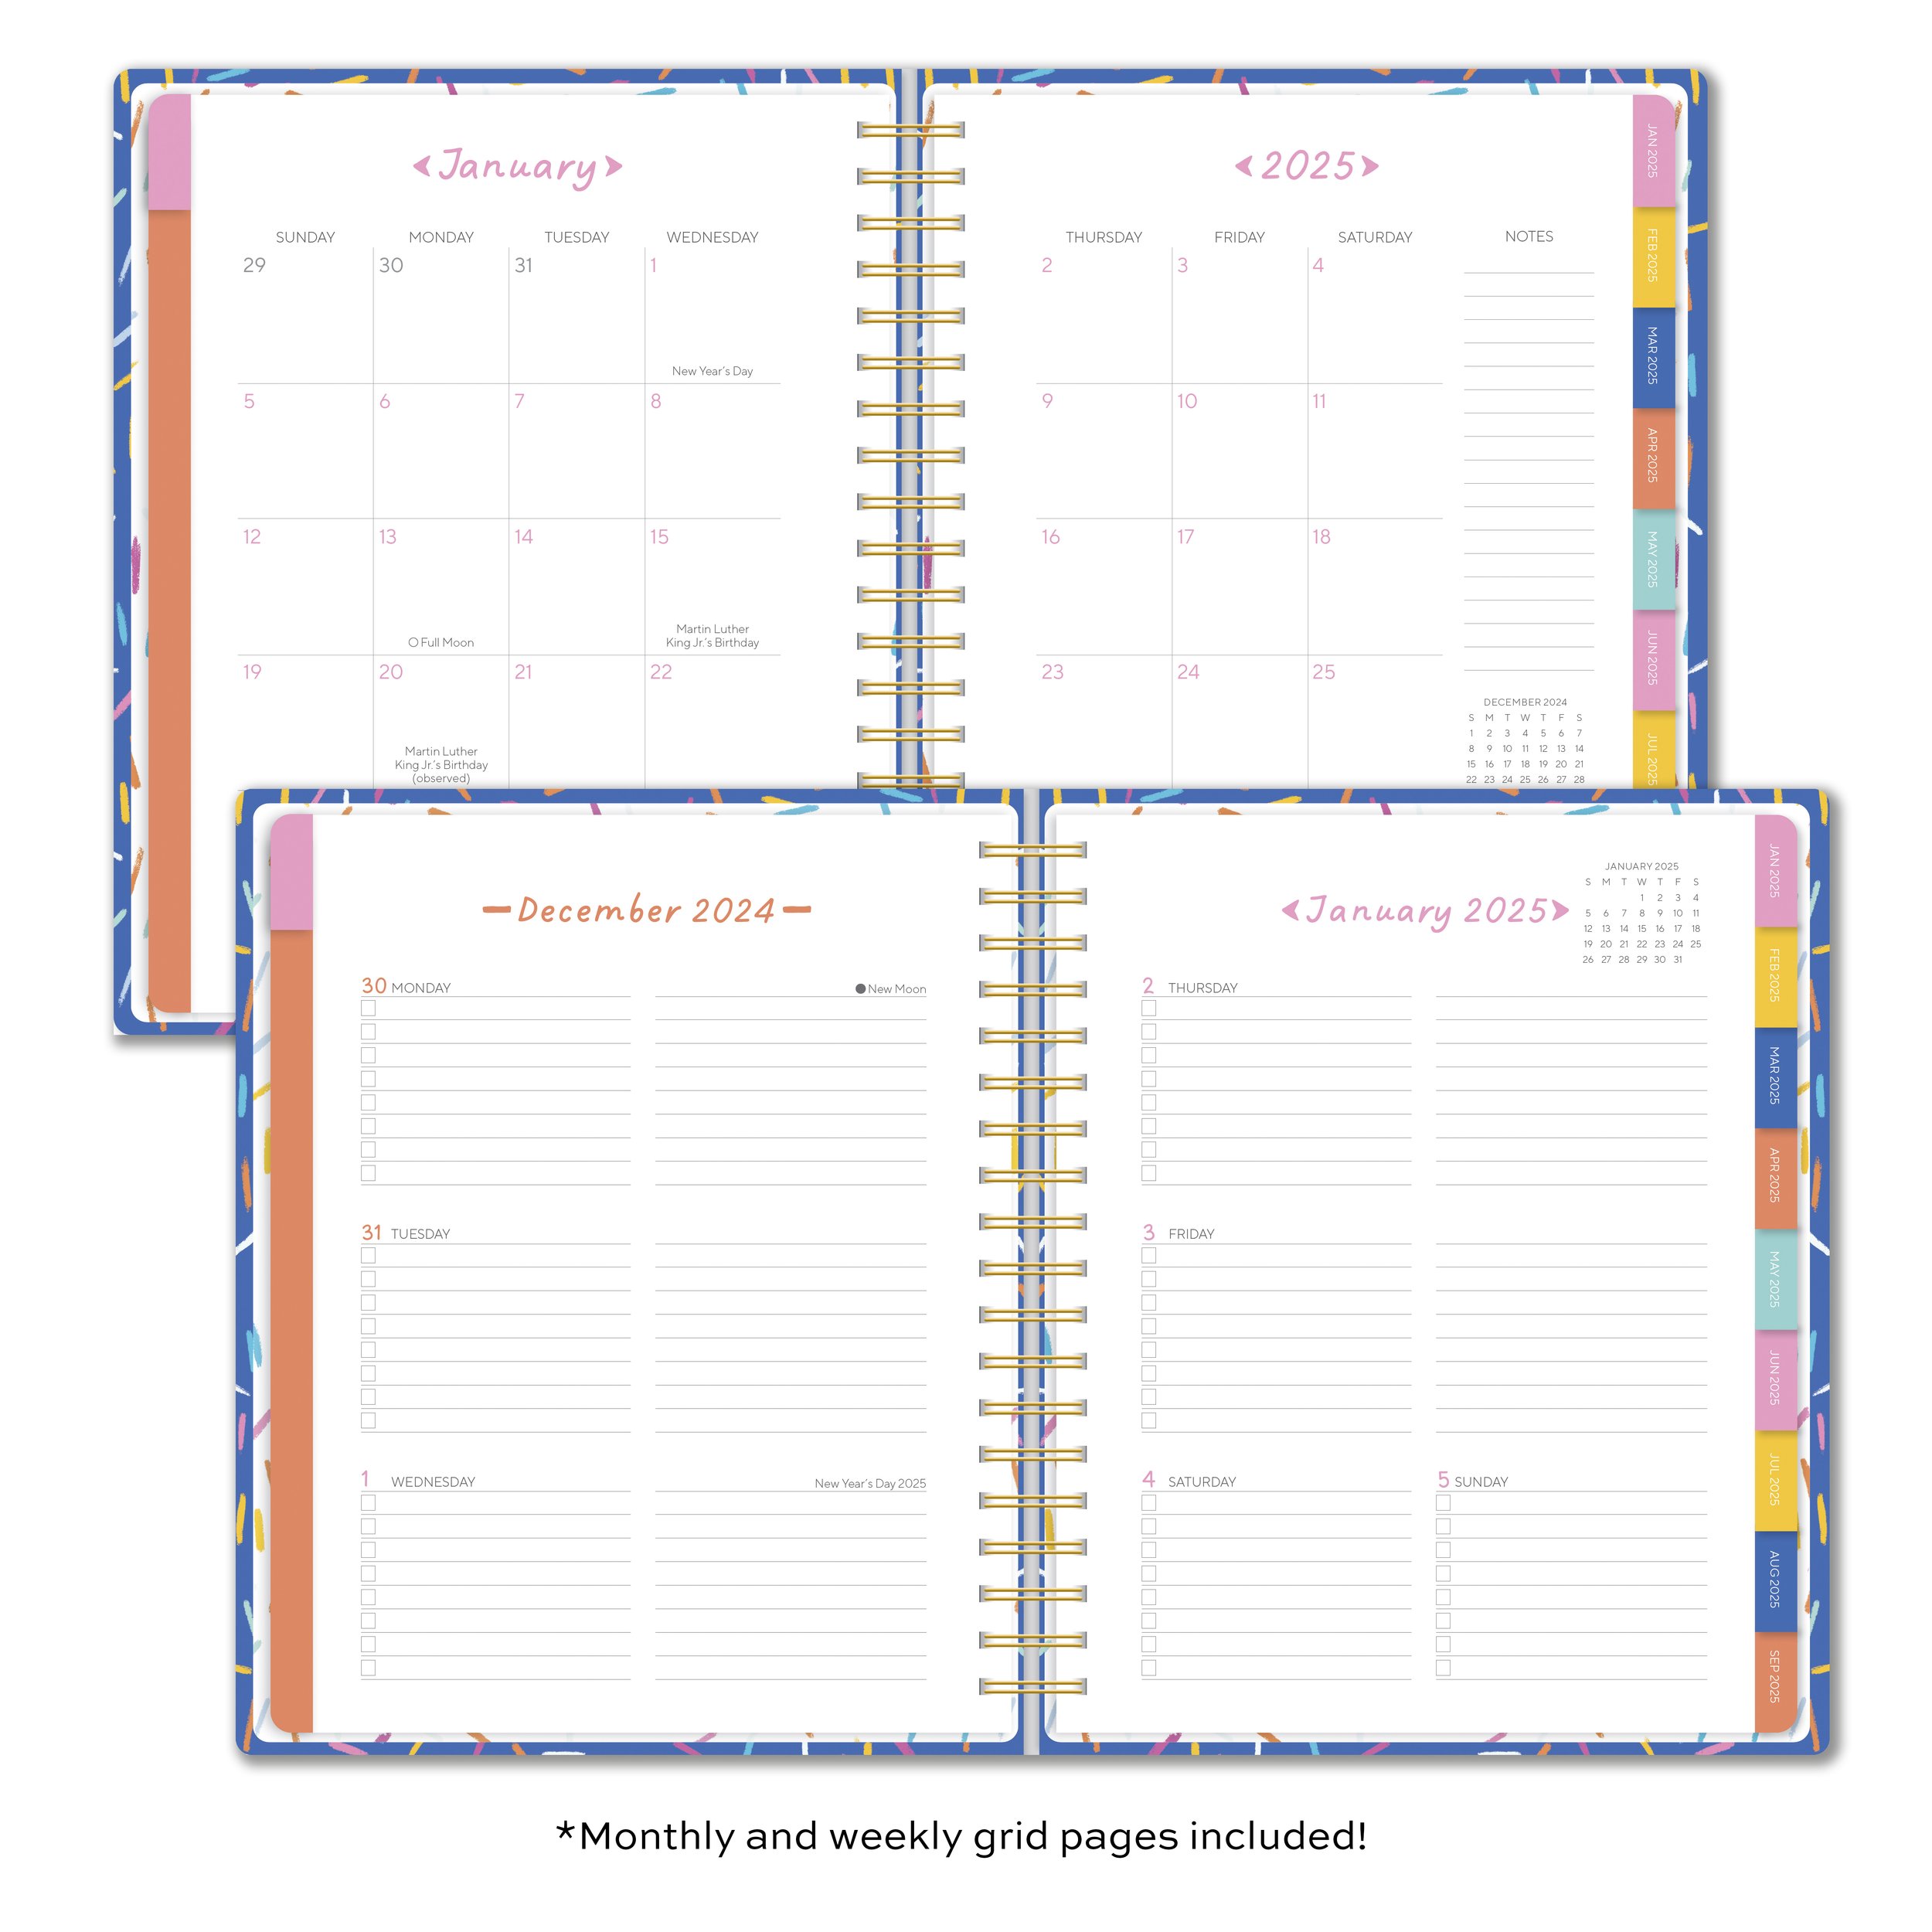 CHL-4207 Geometric 2025 Deluxe Planner Interior Pages.jpg